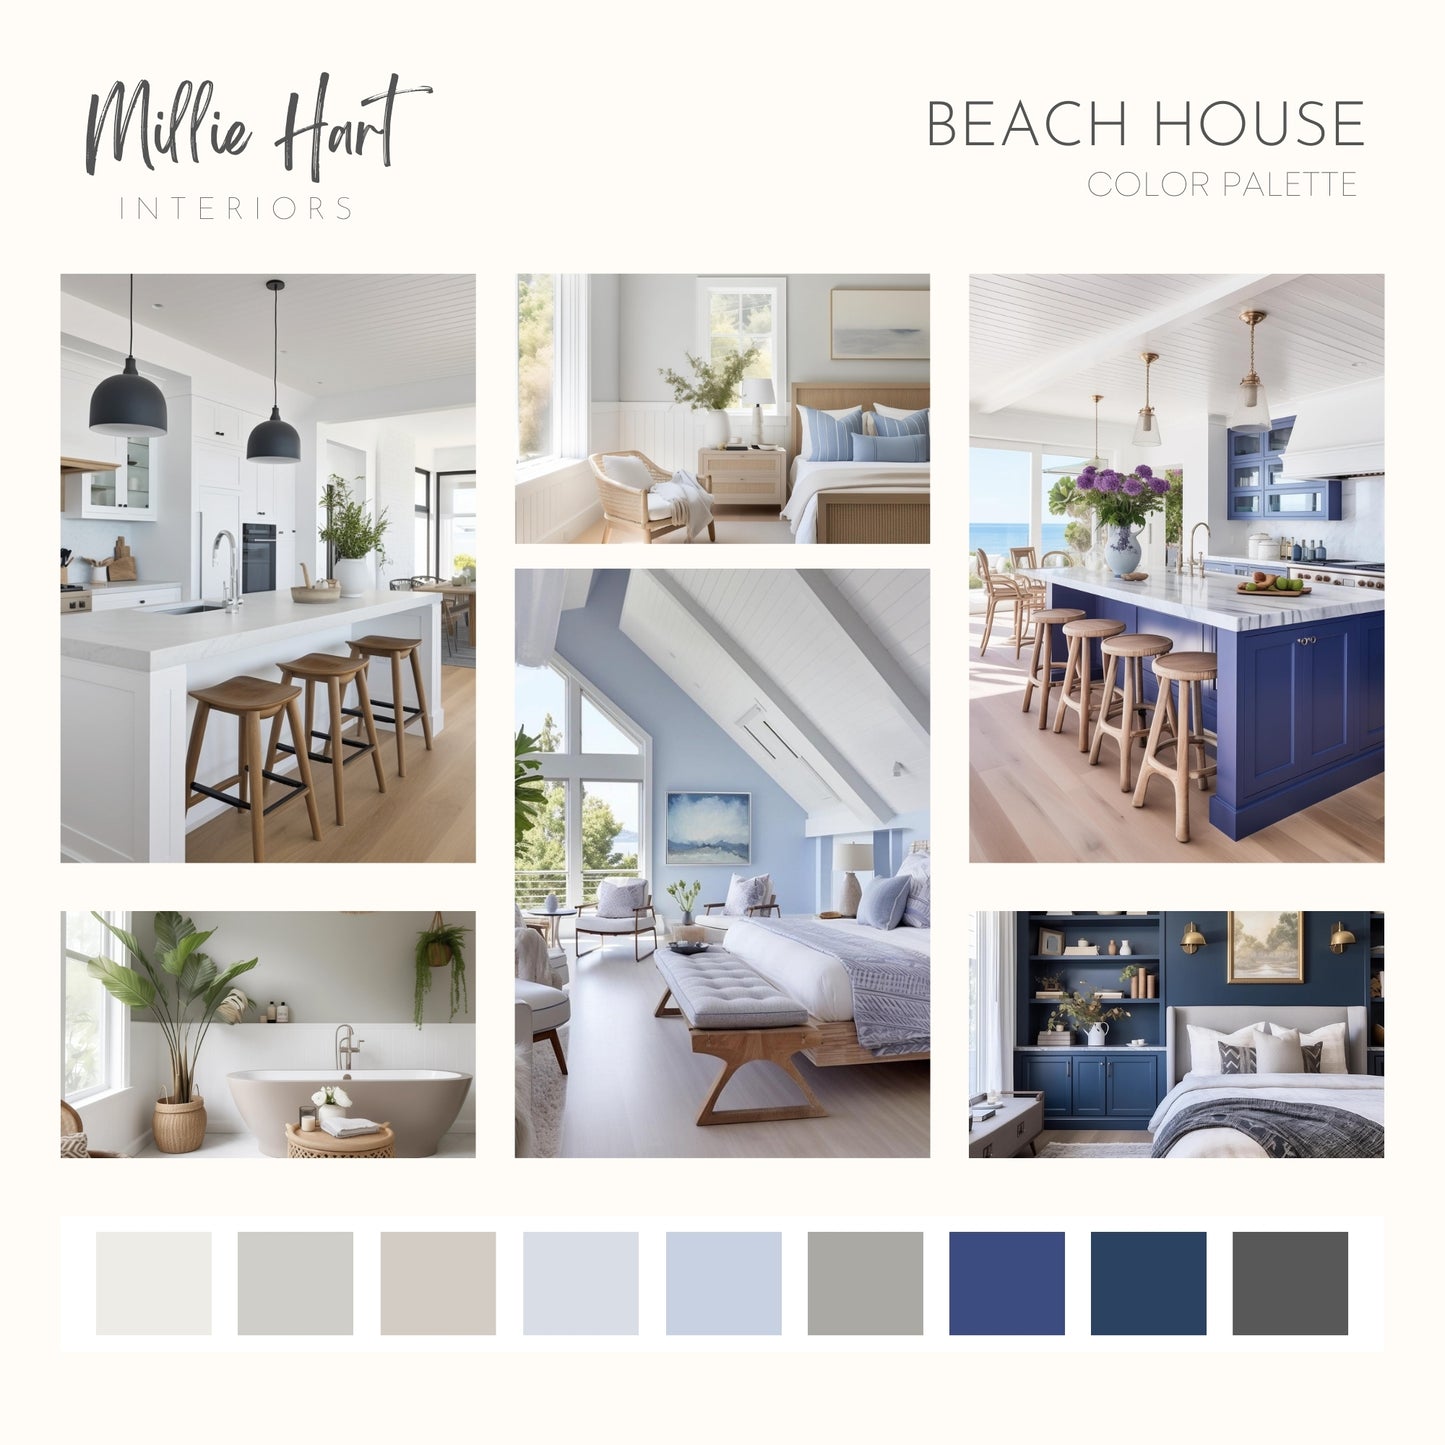 Beach House Benjamin Moore Paint Palette, Interior Paint Colors for Home, Cool Grays, Coastal Colors, White Heron